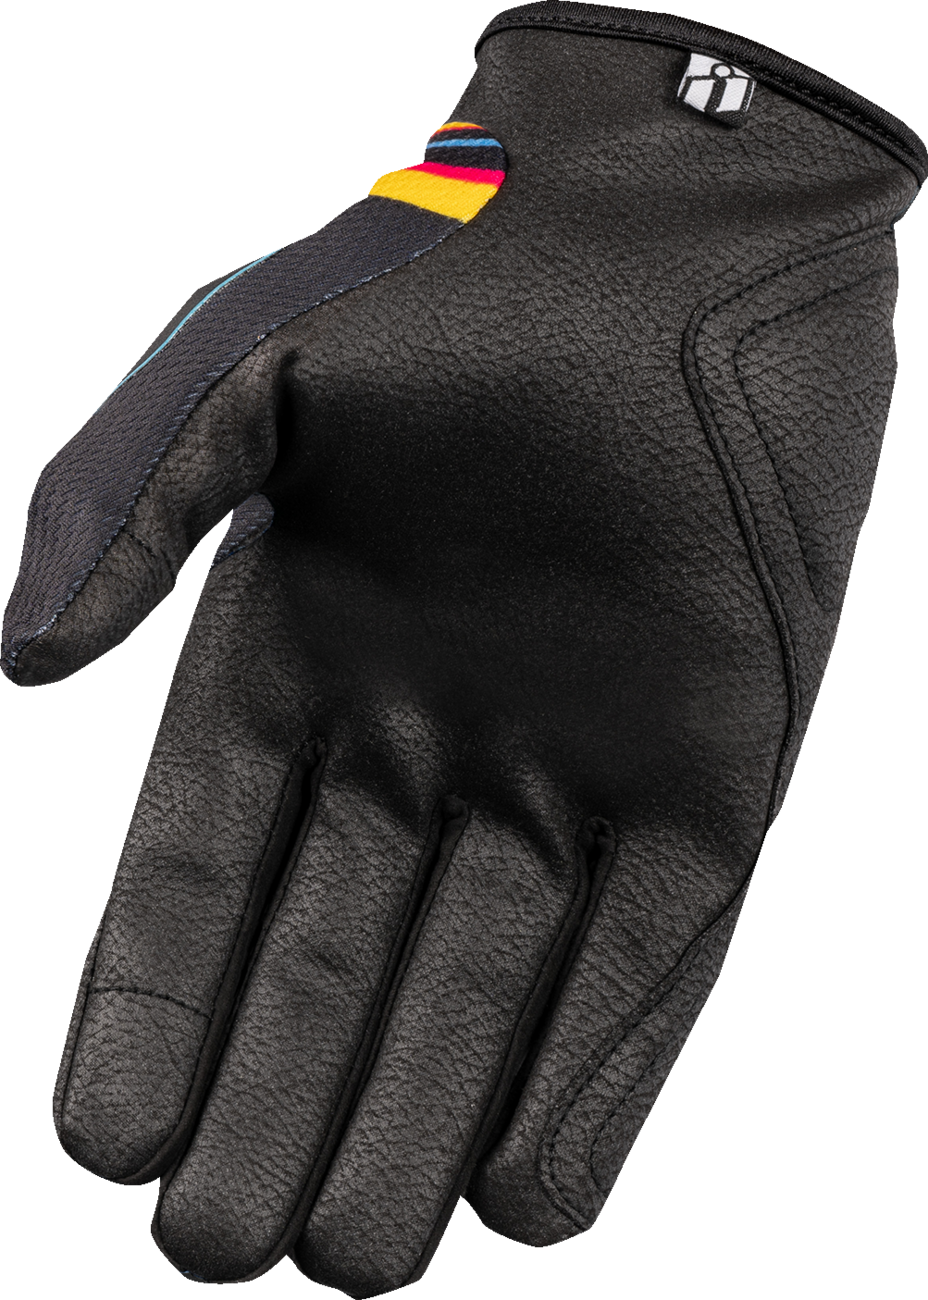 ICON Hooligan™ Lucky Lid Gloves - Black - Small 3301-4641